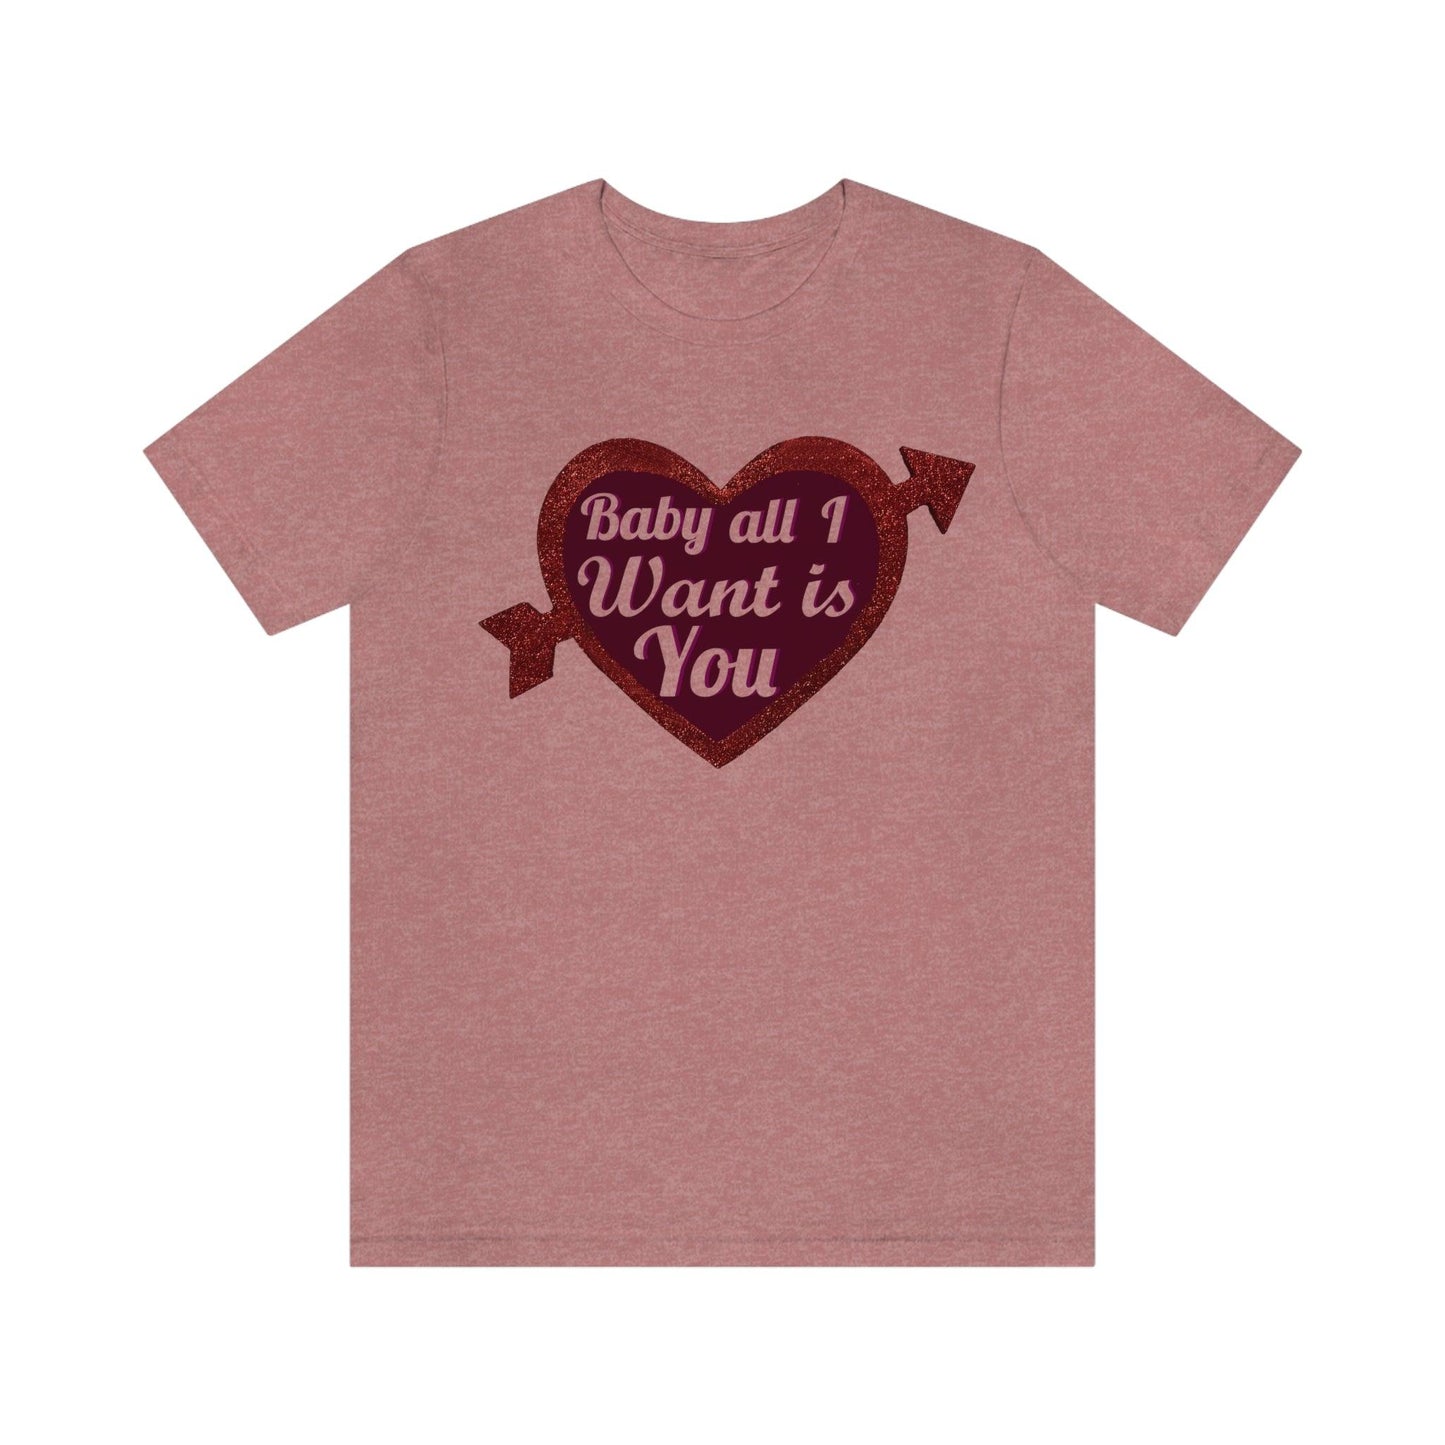 Baby all I want is You Tee - Giftsmojo